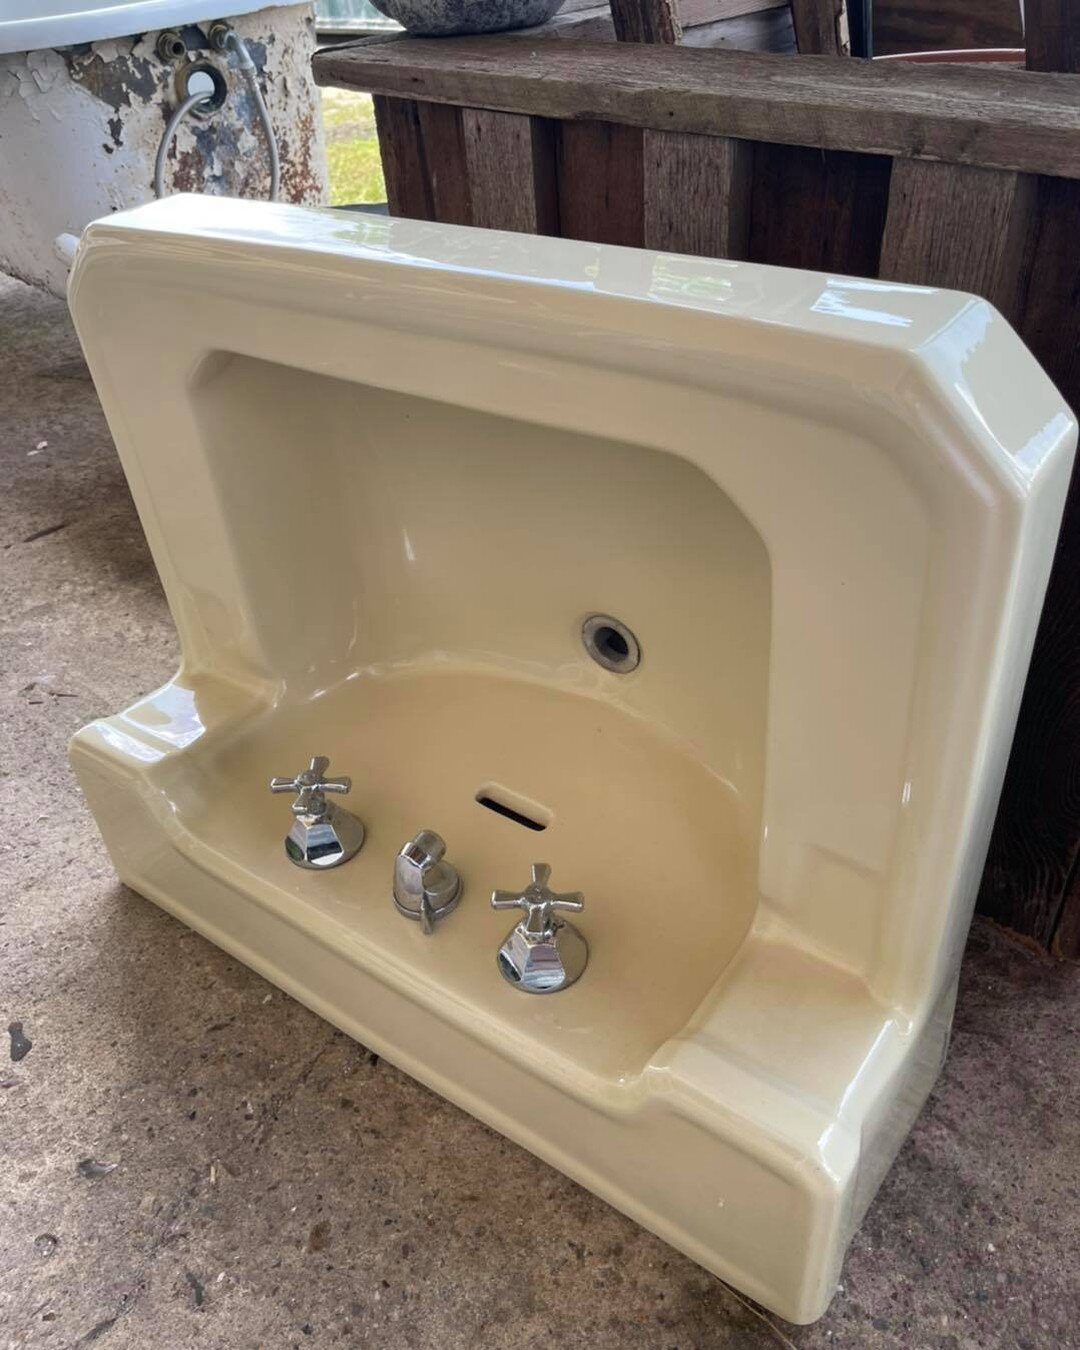 #historichoustonsalvage JUST DONATED! Great vintage wall mounted American Standard sink&hellip; could have chrome legs but doesn&rsquo;t have to.. beautiful ORIGINAL CONDITION!!
#historichouston
#salvagewarehouse
#vintageamericanstandard
#vintagestyl